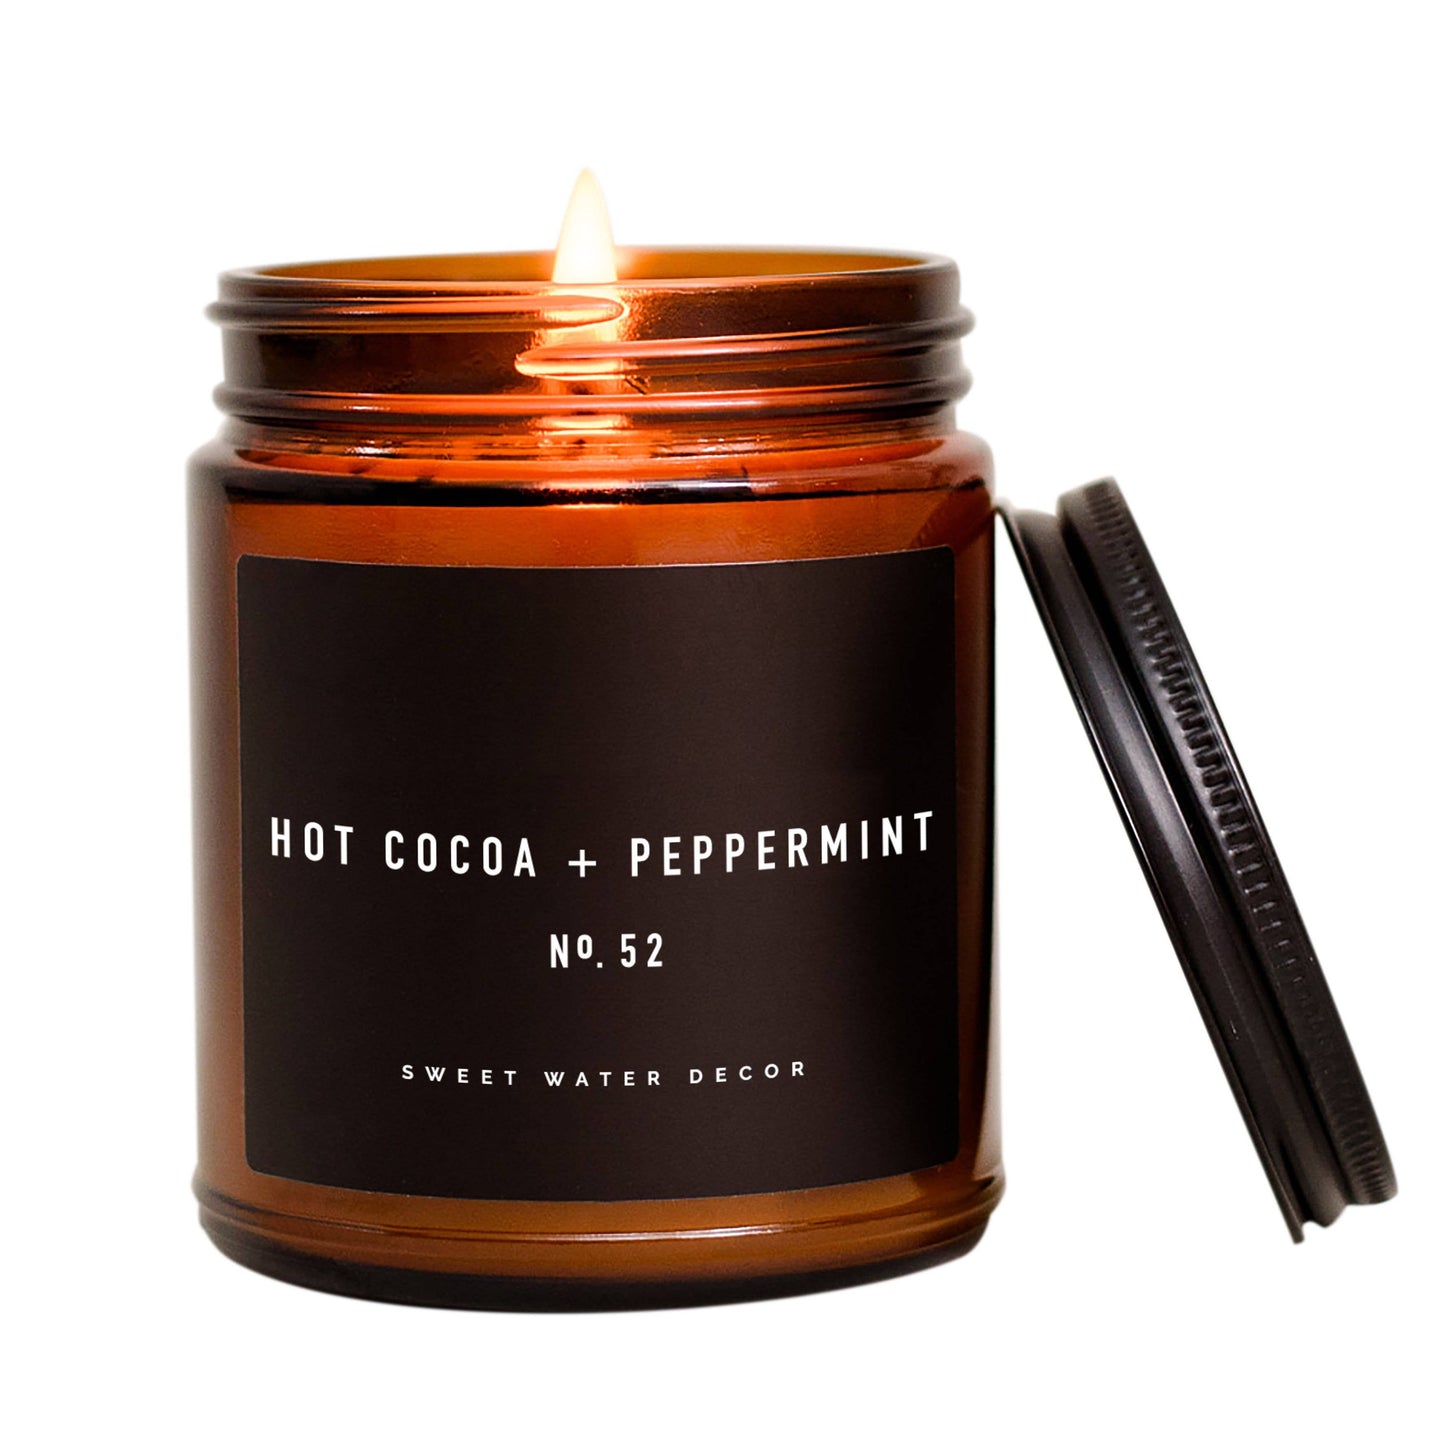 Hot Cocoa and Peppermint Soy Candle